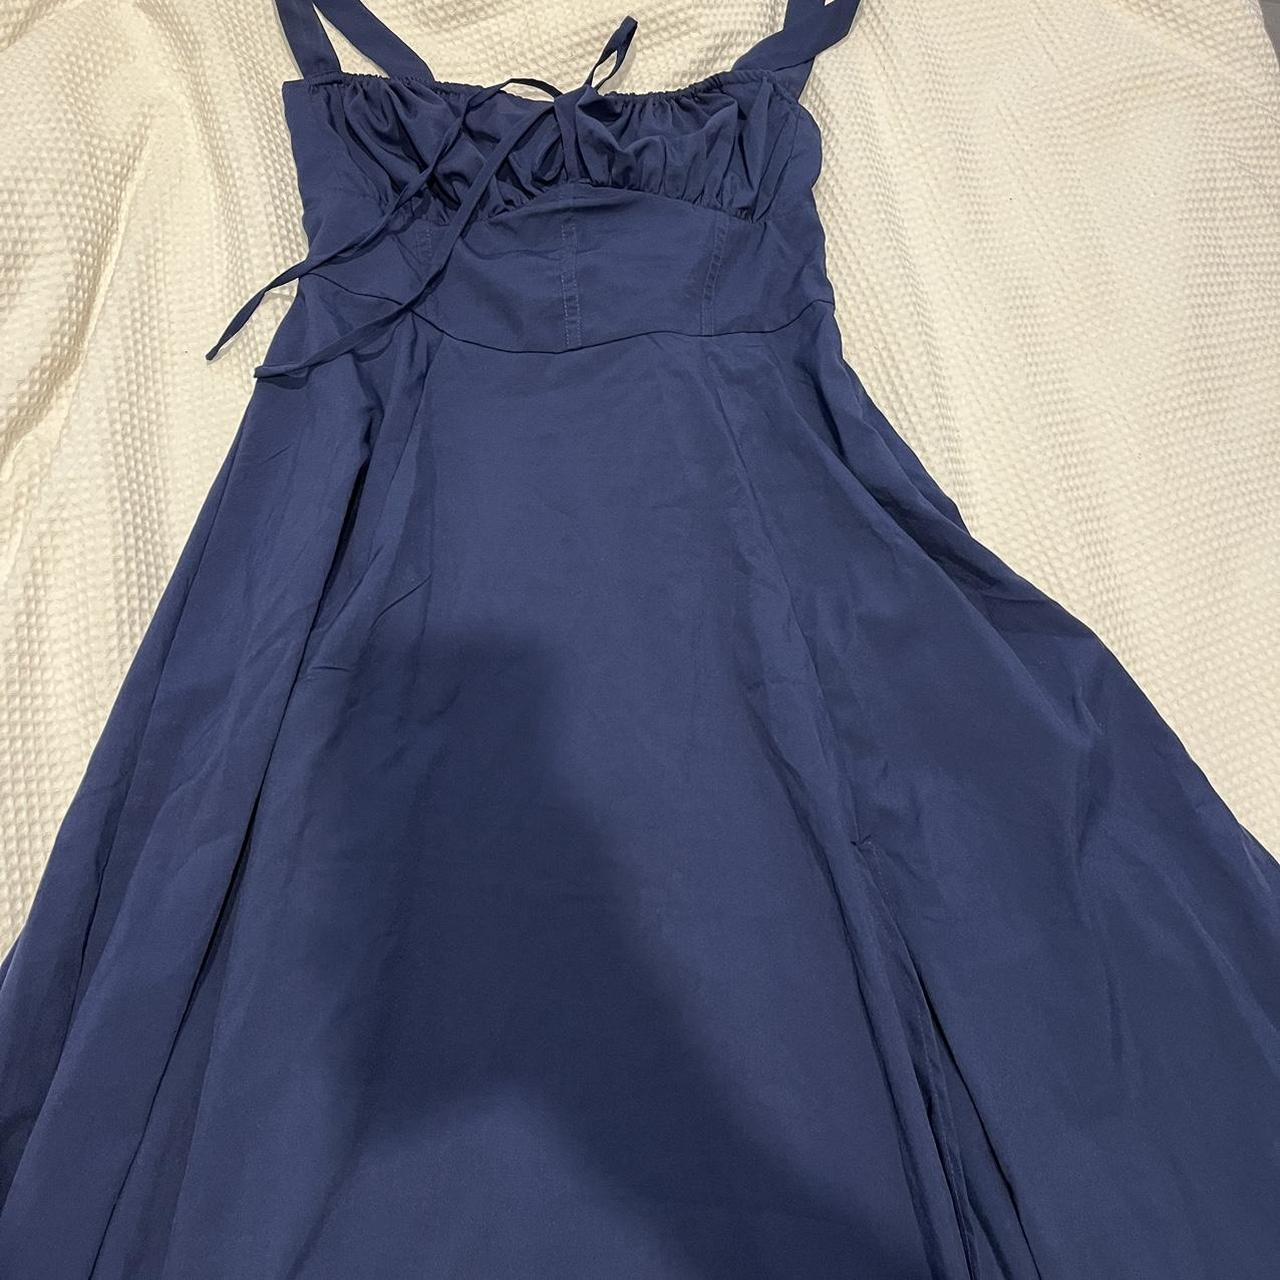 navy Carmen style dress - dupe - not real house of... - Depop